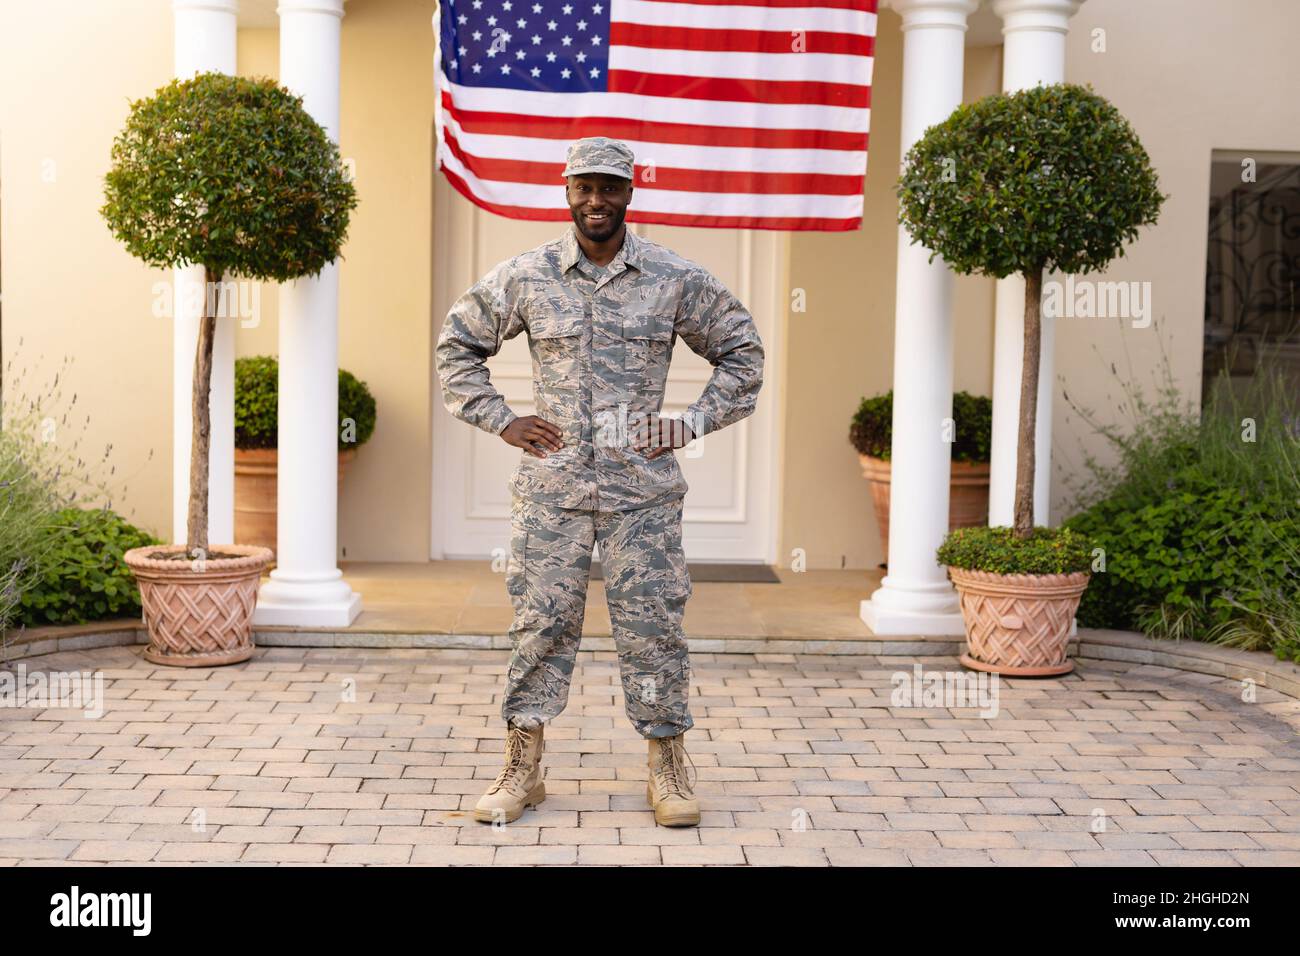 Portrait of smiling african american army man standing with hand on hip against flag on house Stock Photo